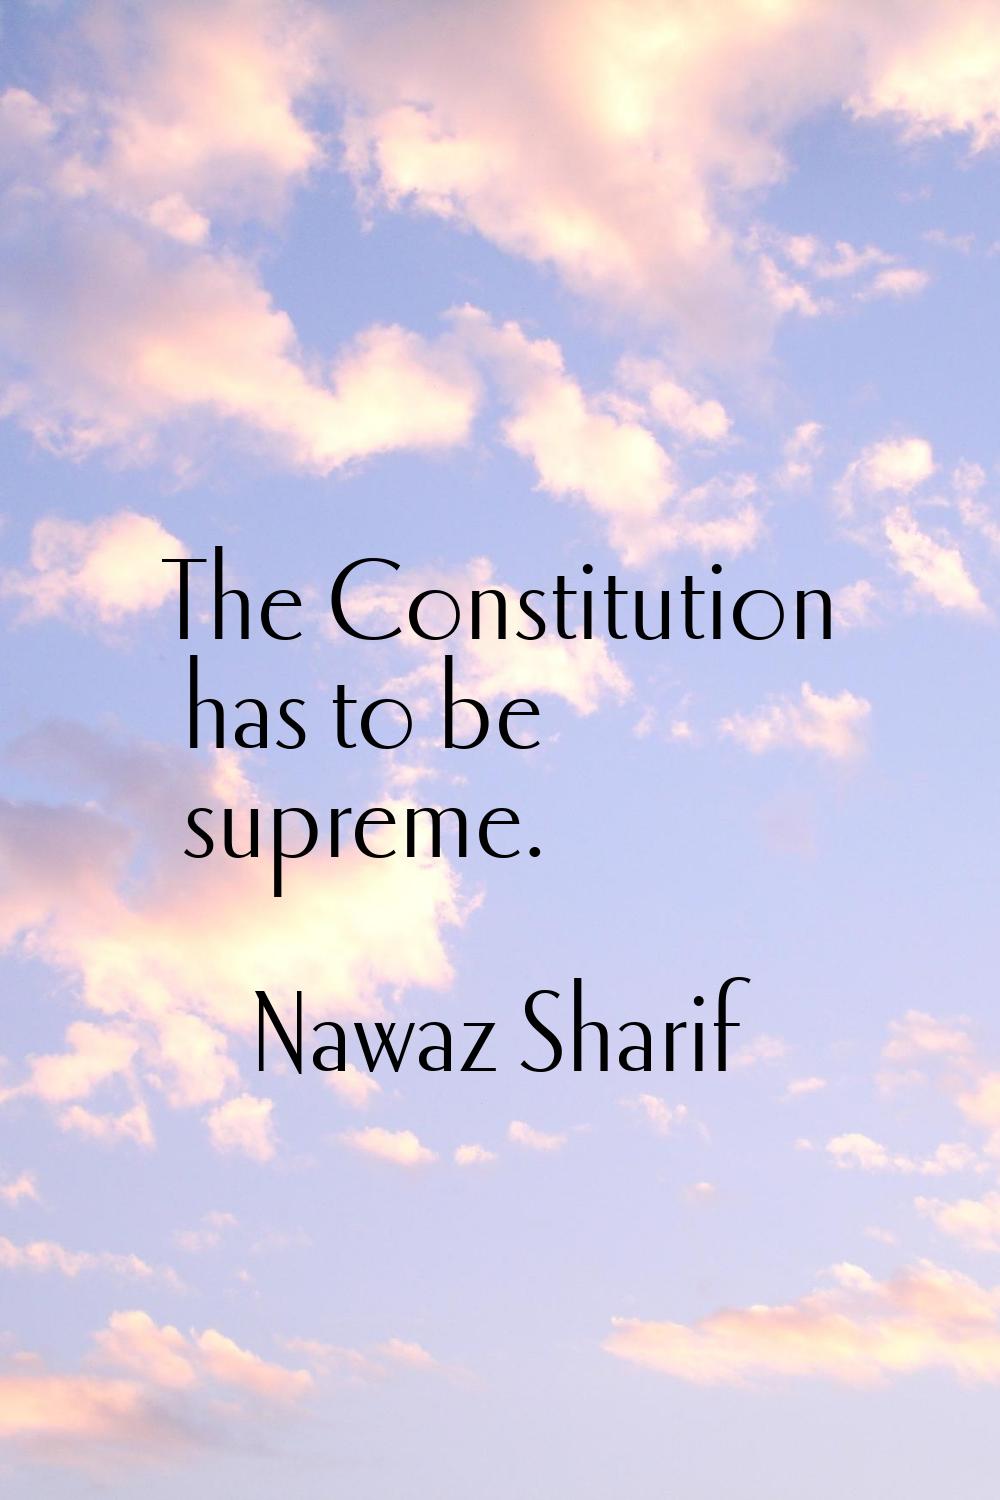 The Constitution has to be supreme.